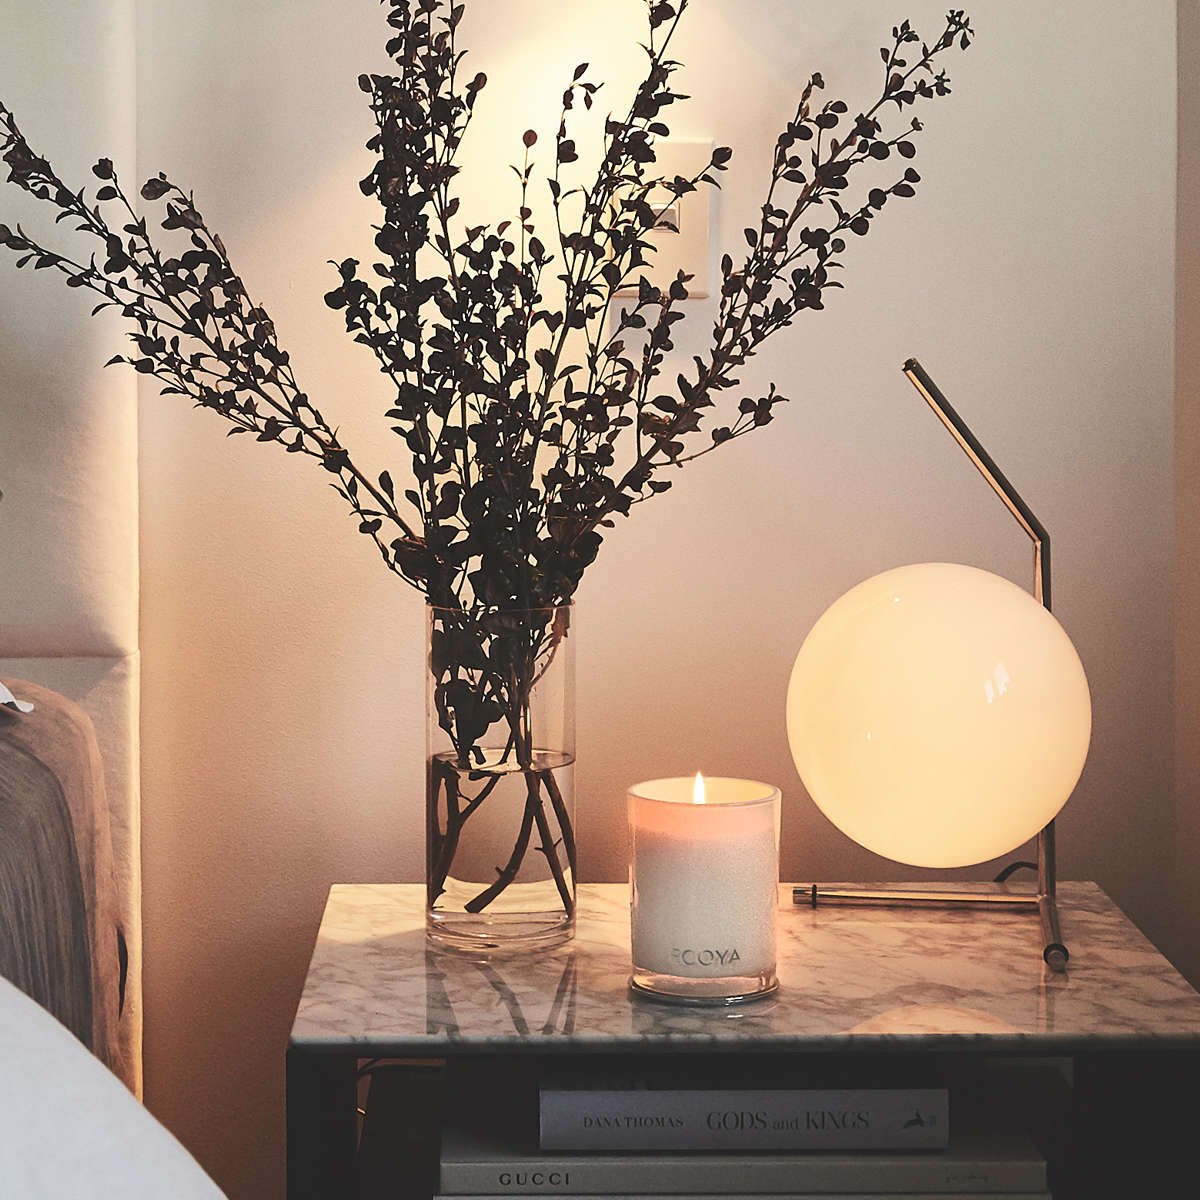 Candle and books with lamp in Anna Southwell's home